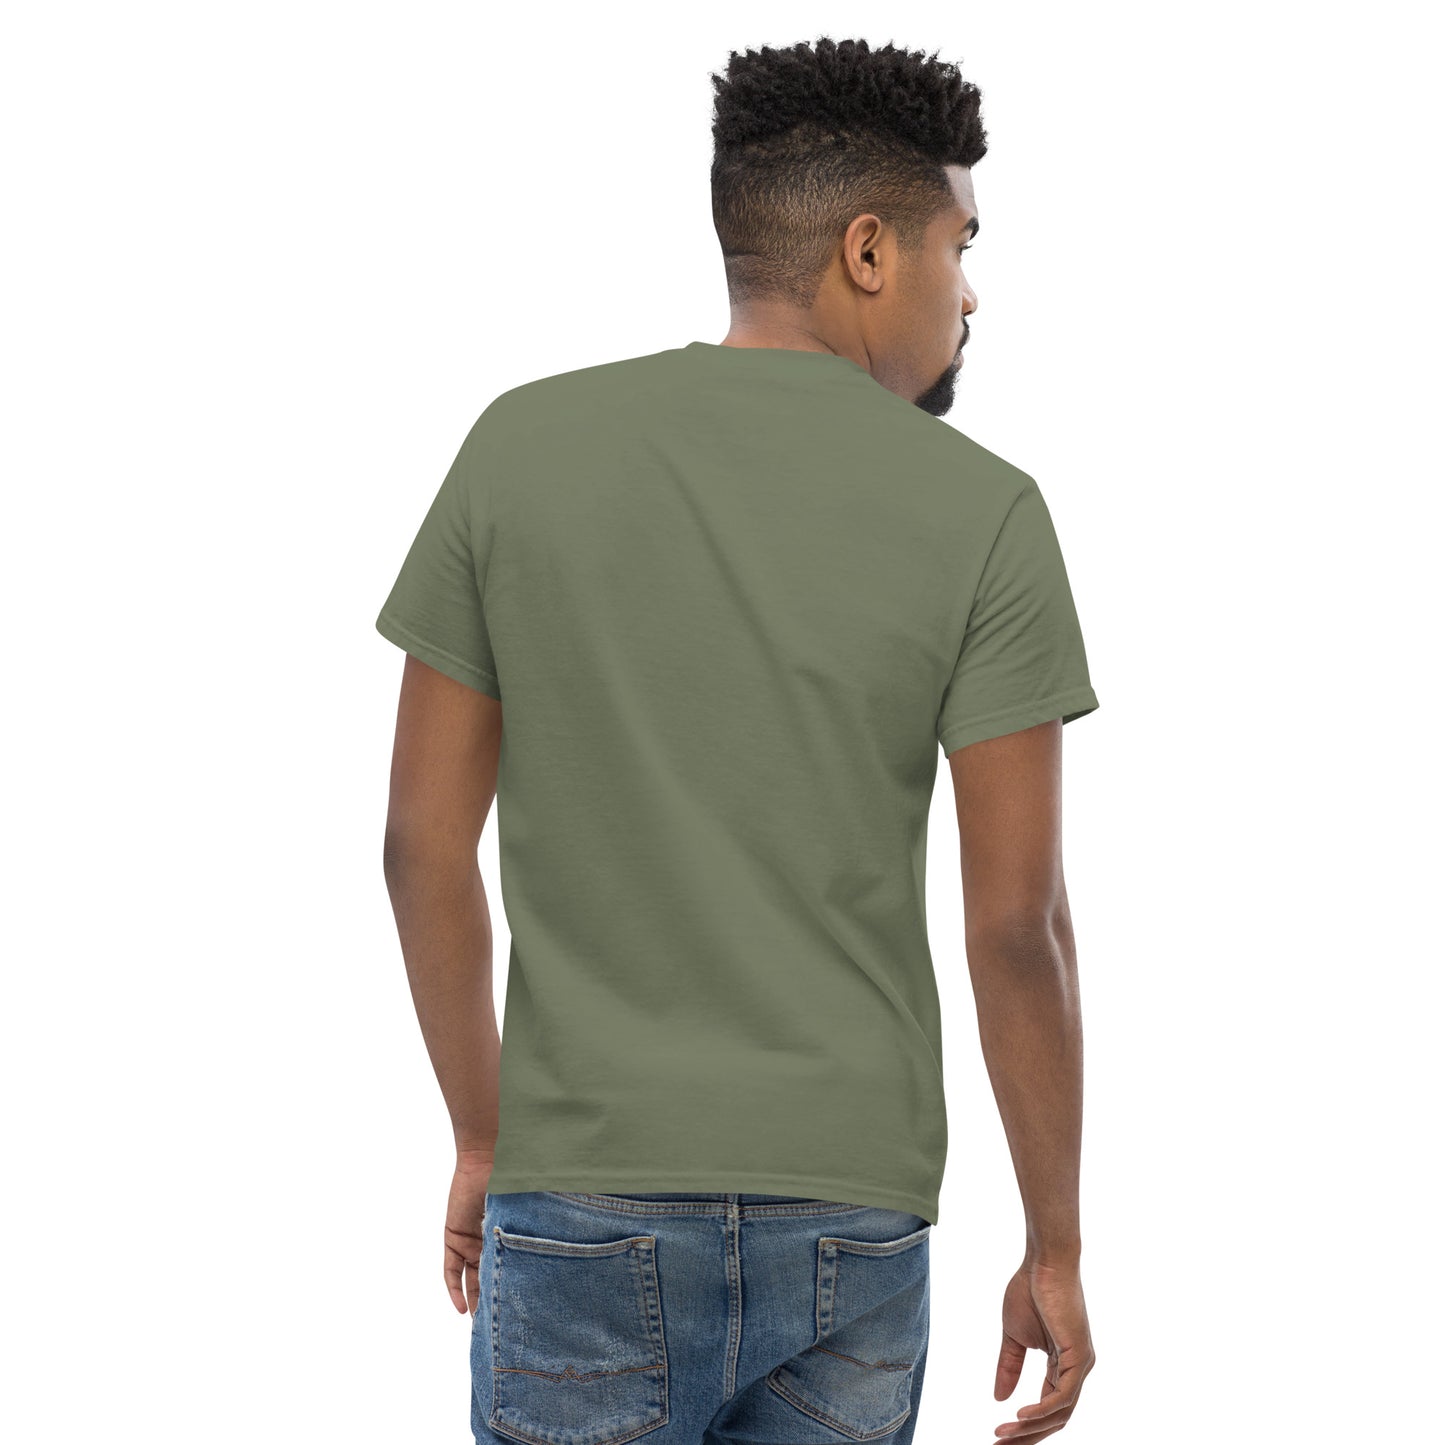 Lil Dill Daddy - Military Green - Men's Tee